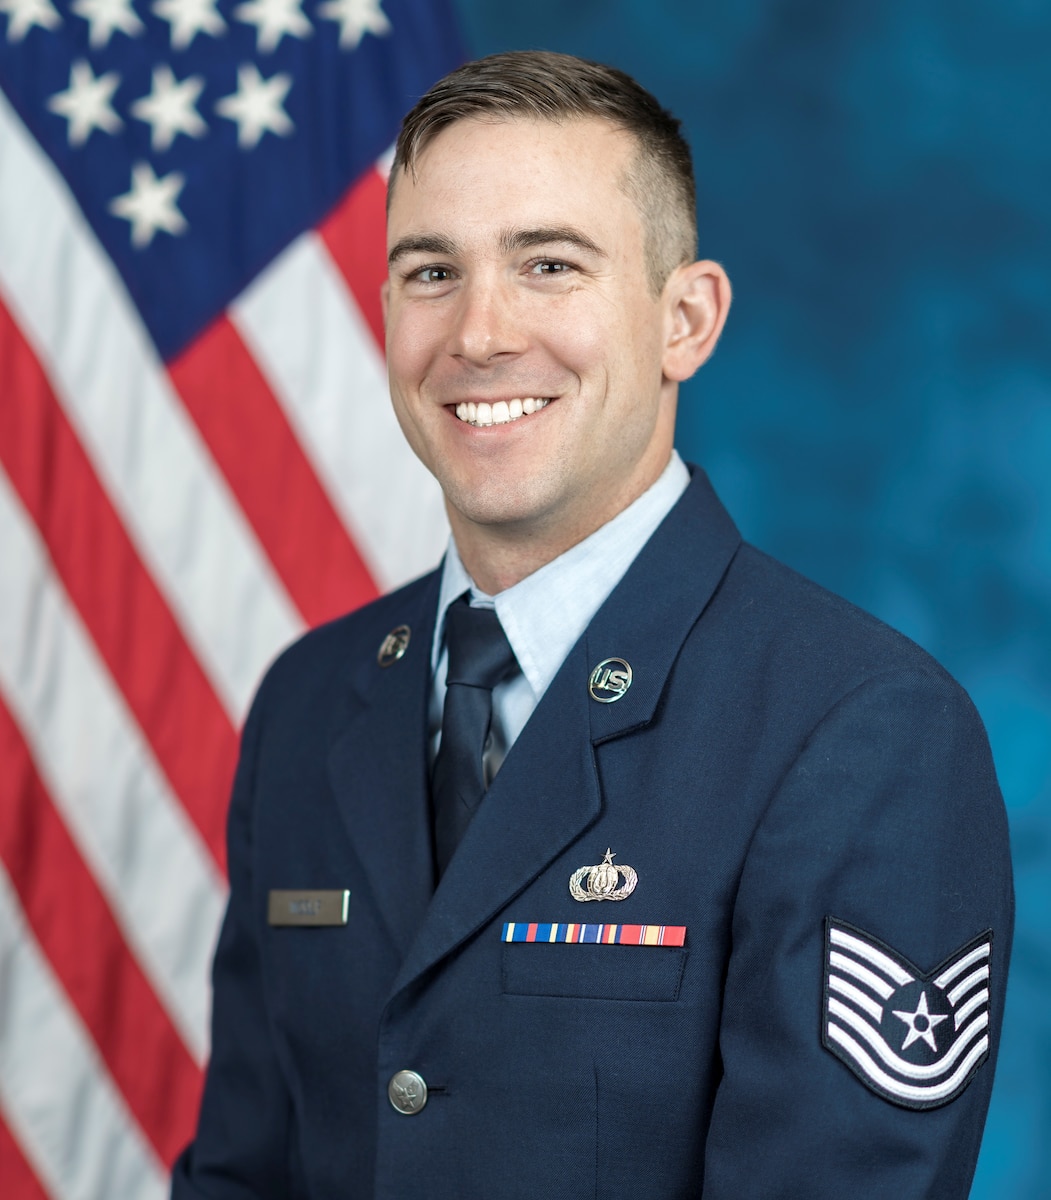 Official photo of Technical Sgt. Jim Woolf, audio engineer for The United States Air Force Band, Joint Base Anacostia-Bolling, Washington, D.C.